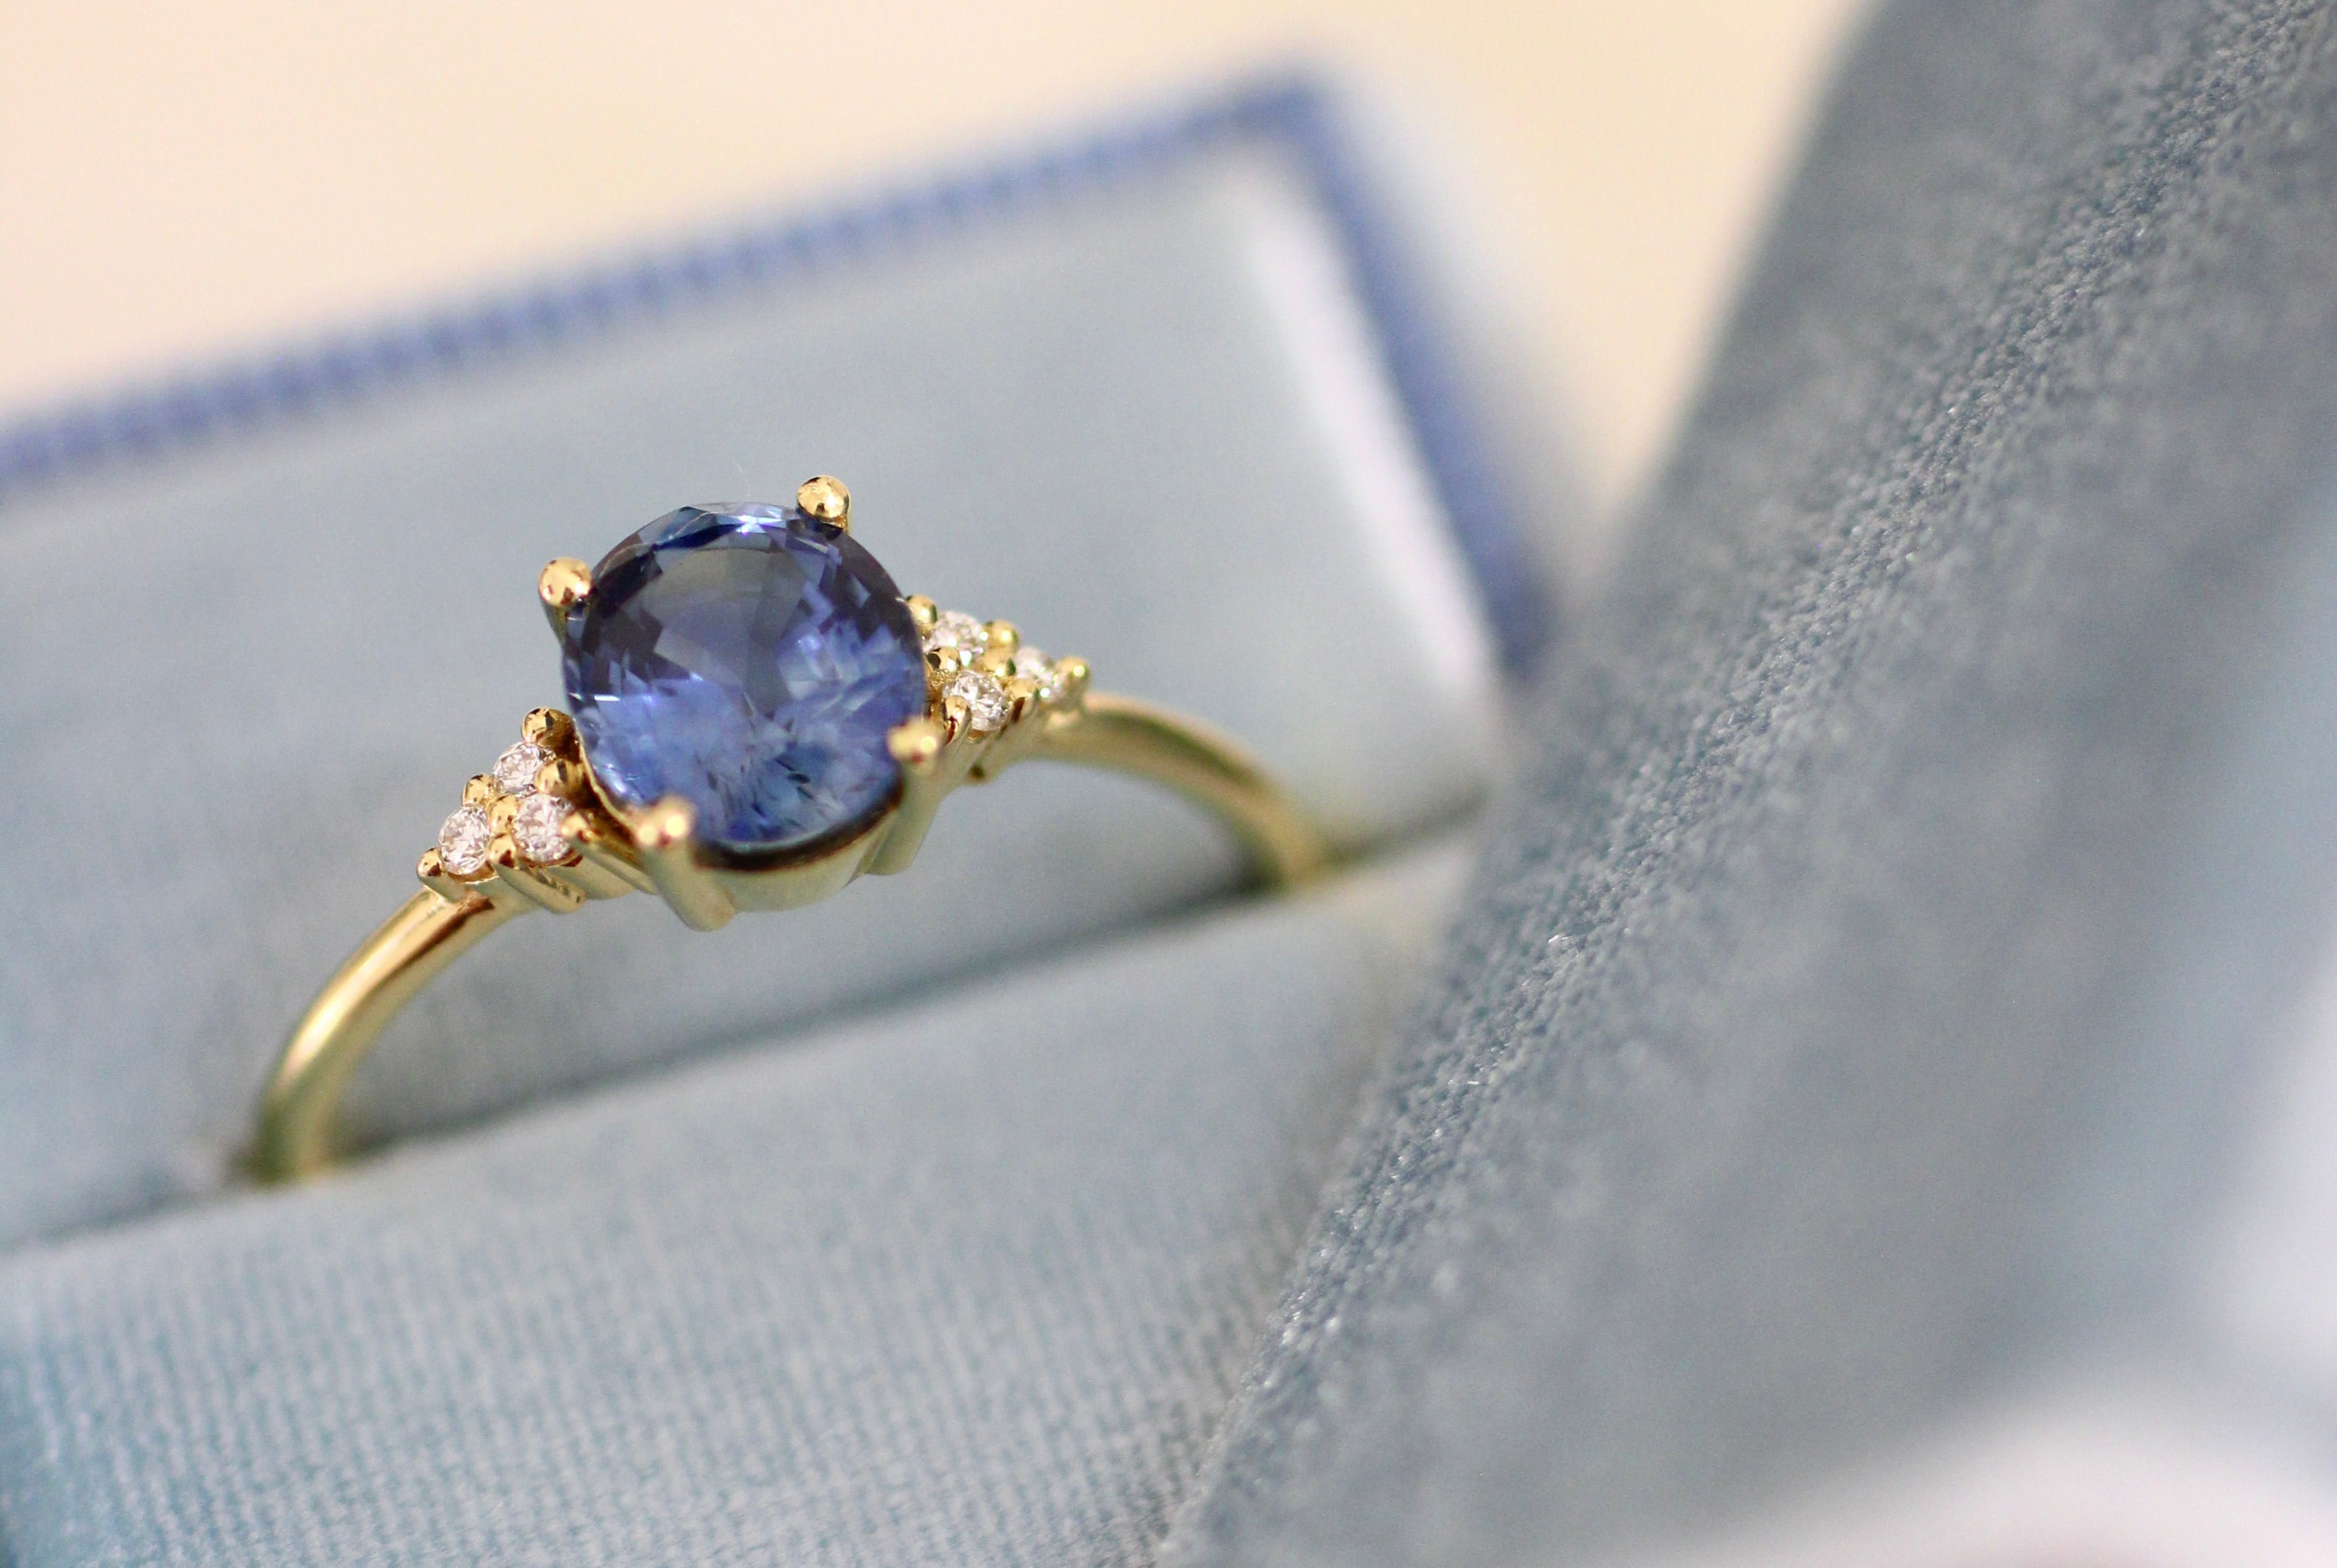 This majestic Engagement Ring is made of 18K Yellow Gold, nesting 6 mesmerizing Perfect Cut G-H, VS Conflict-Free Diamonds, and at the center, a lovely deep-blue Sapphire.